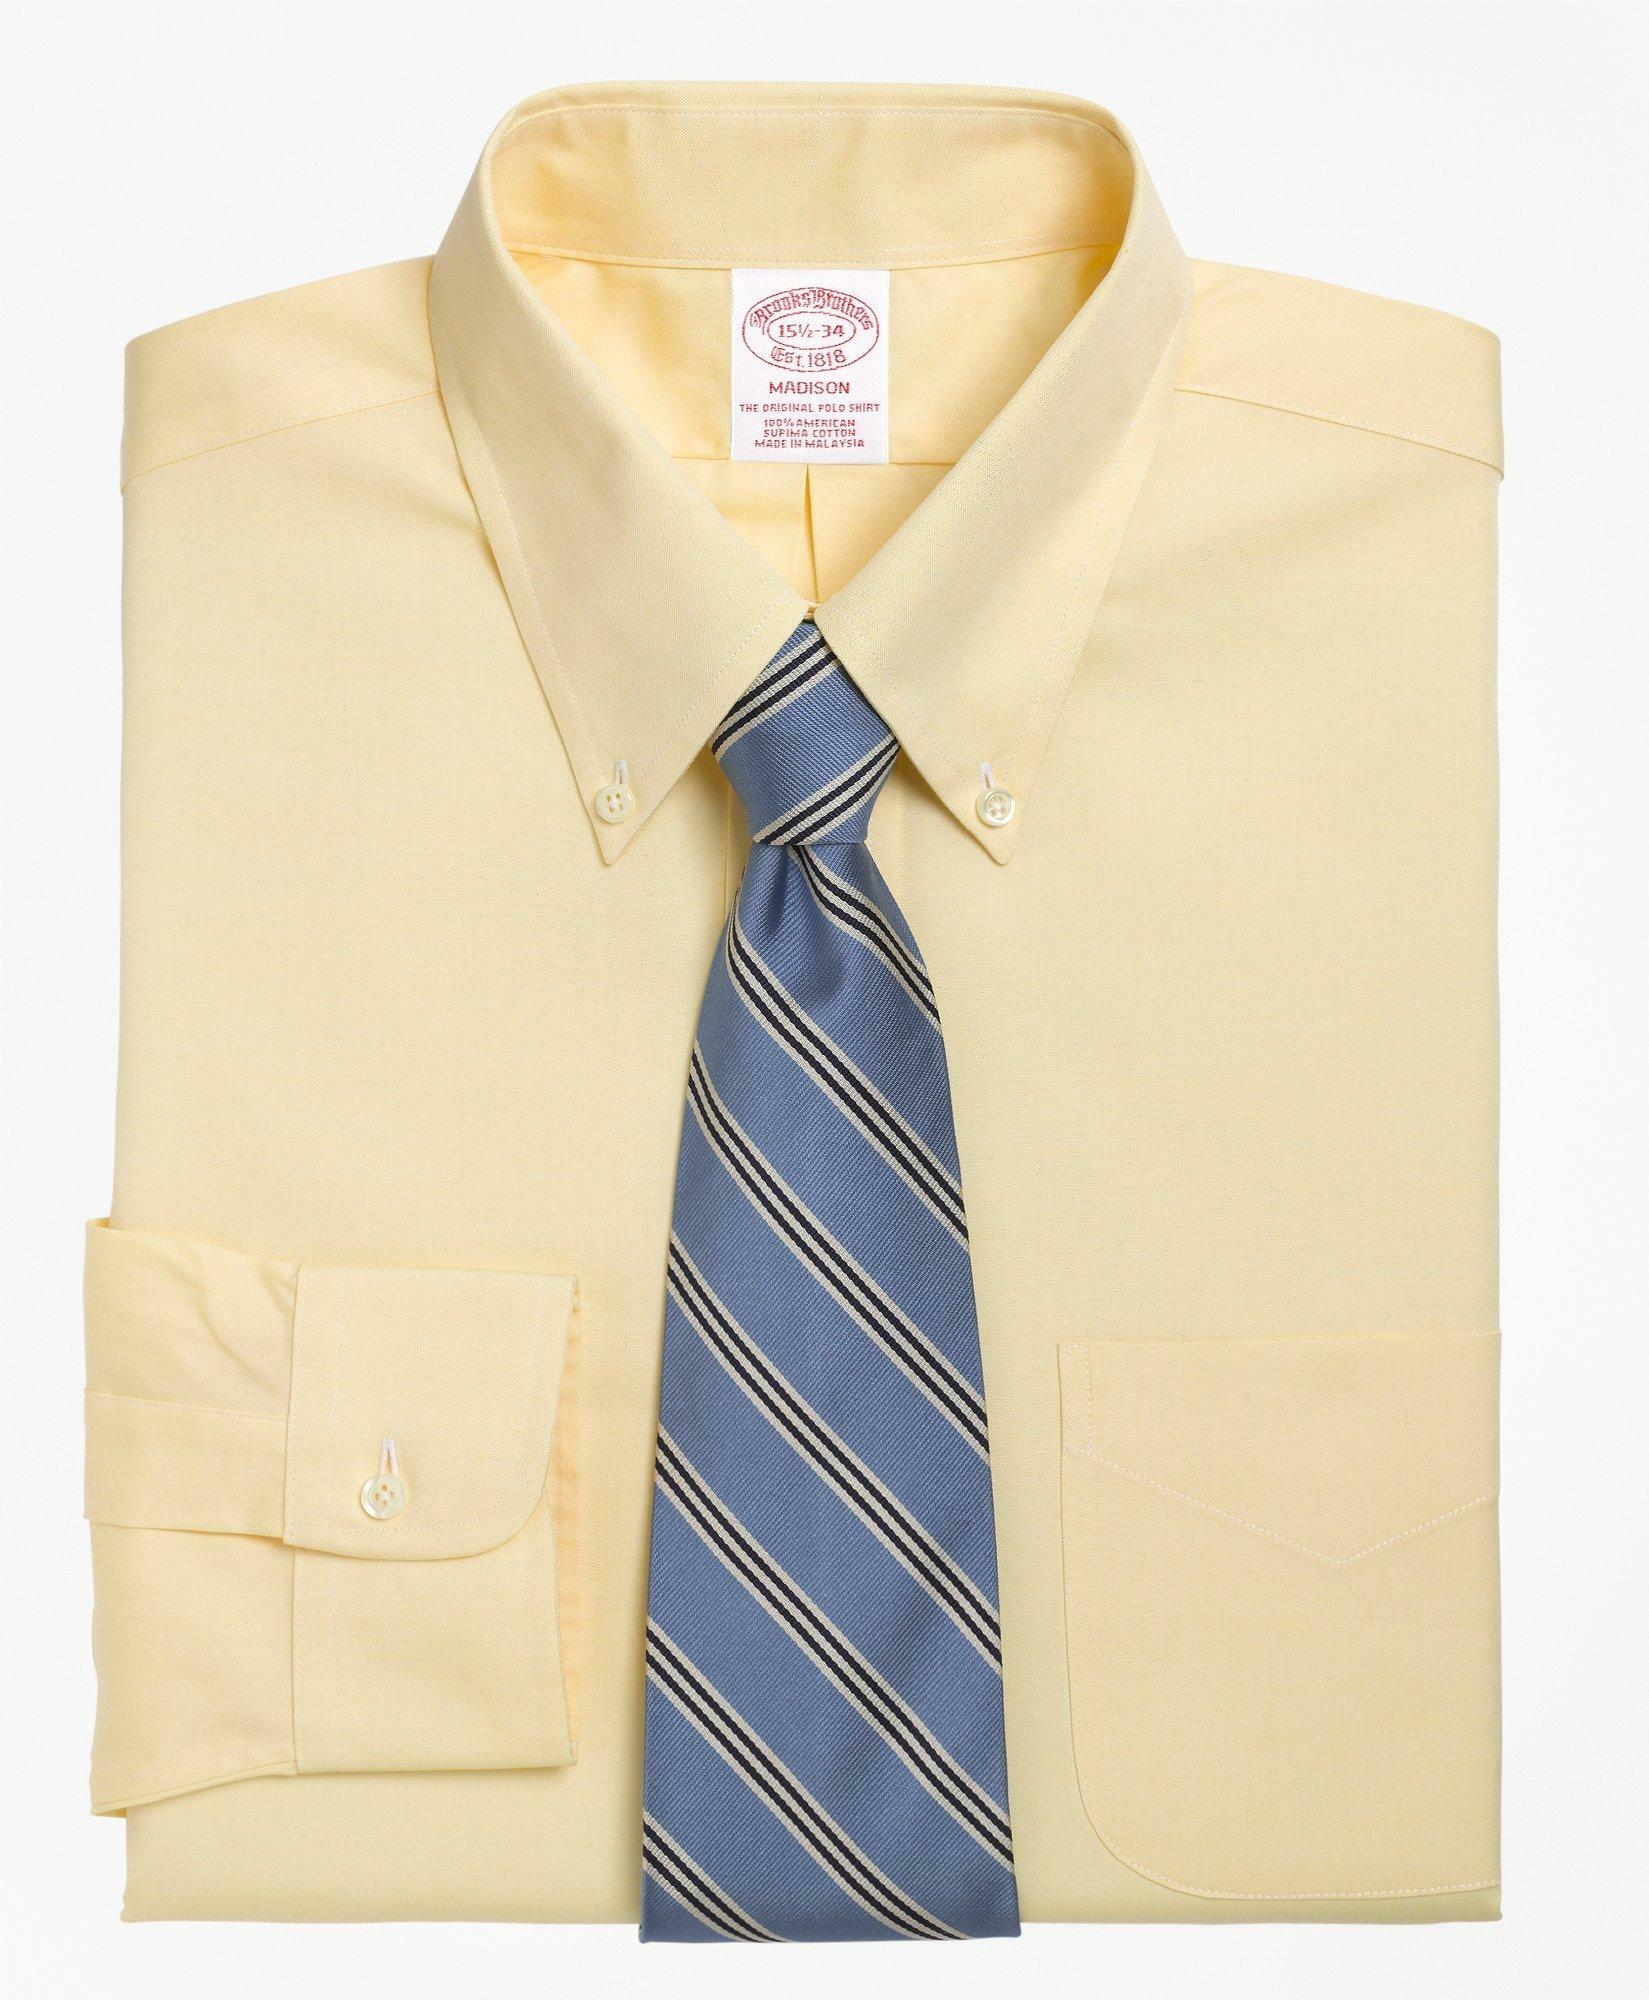 Brooks Brothers Men's Madison Relaxed-Fit Dress Shirt, Button-Down Collar | Yellow